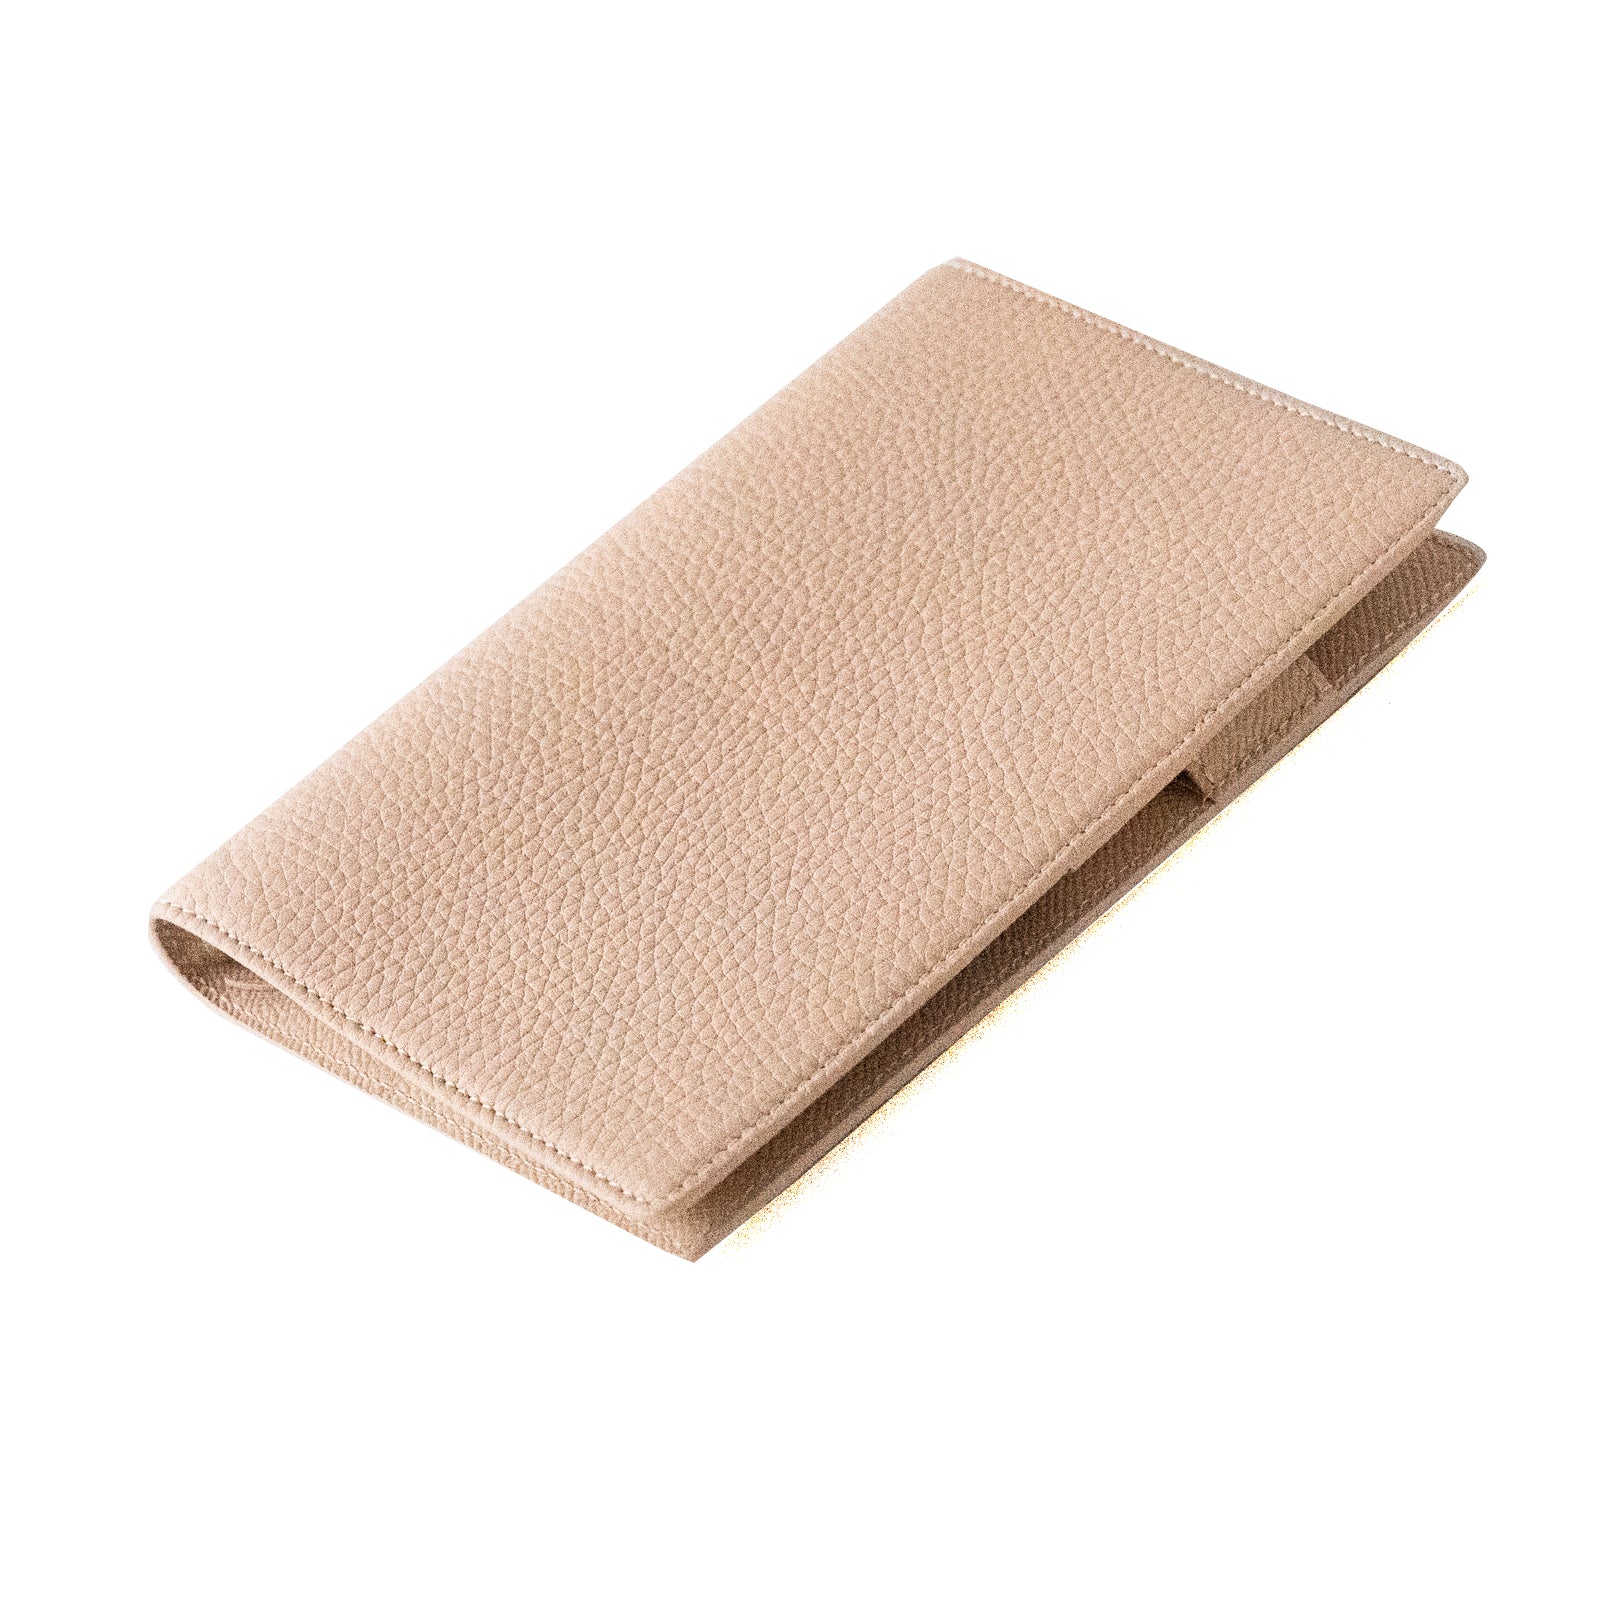 pic【6th Anniversary Thanksgiving】Bible Size System Organizer Cover Taurillon Clemence/Pink Beige